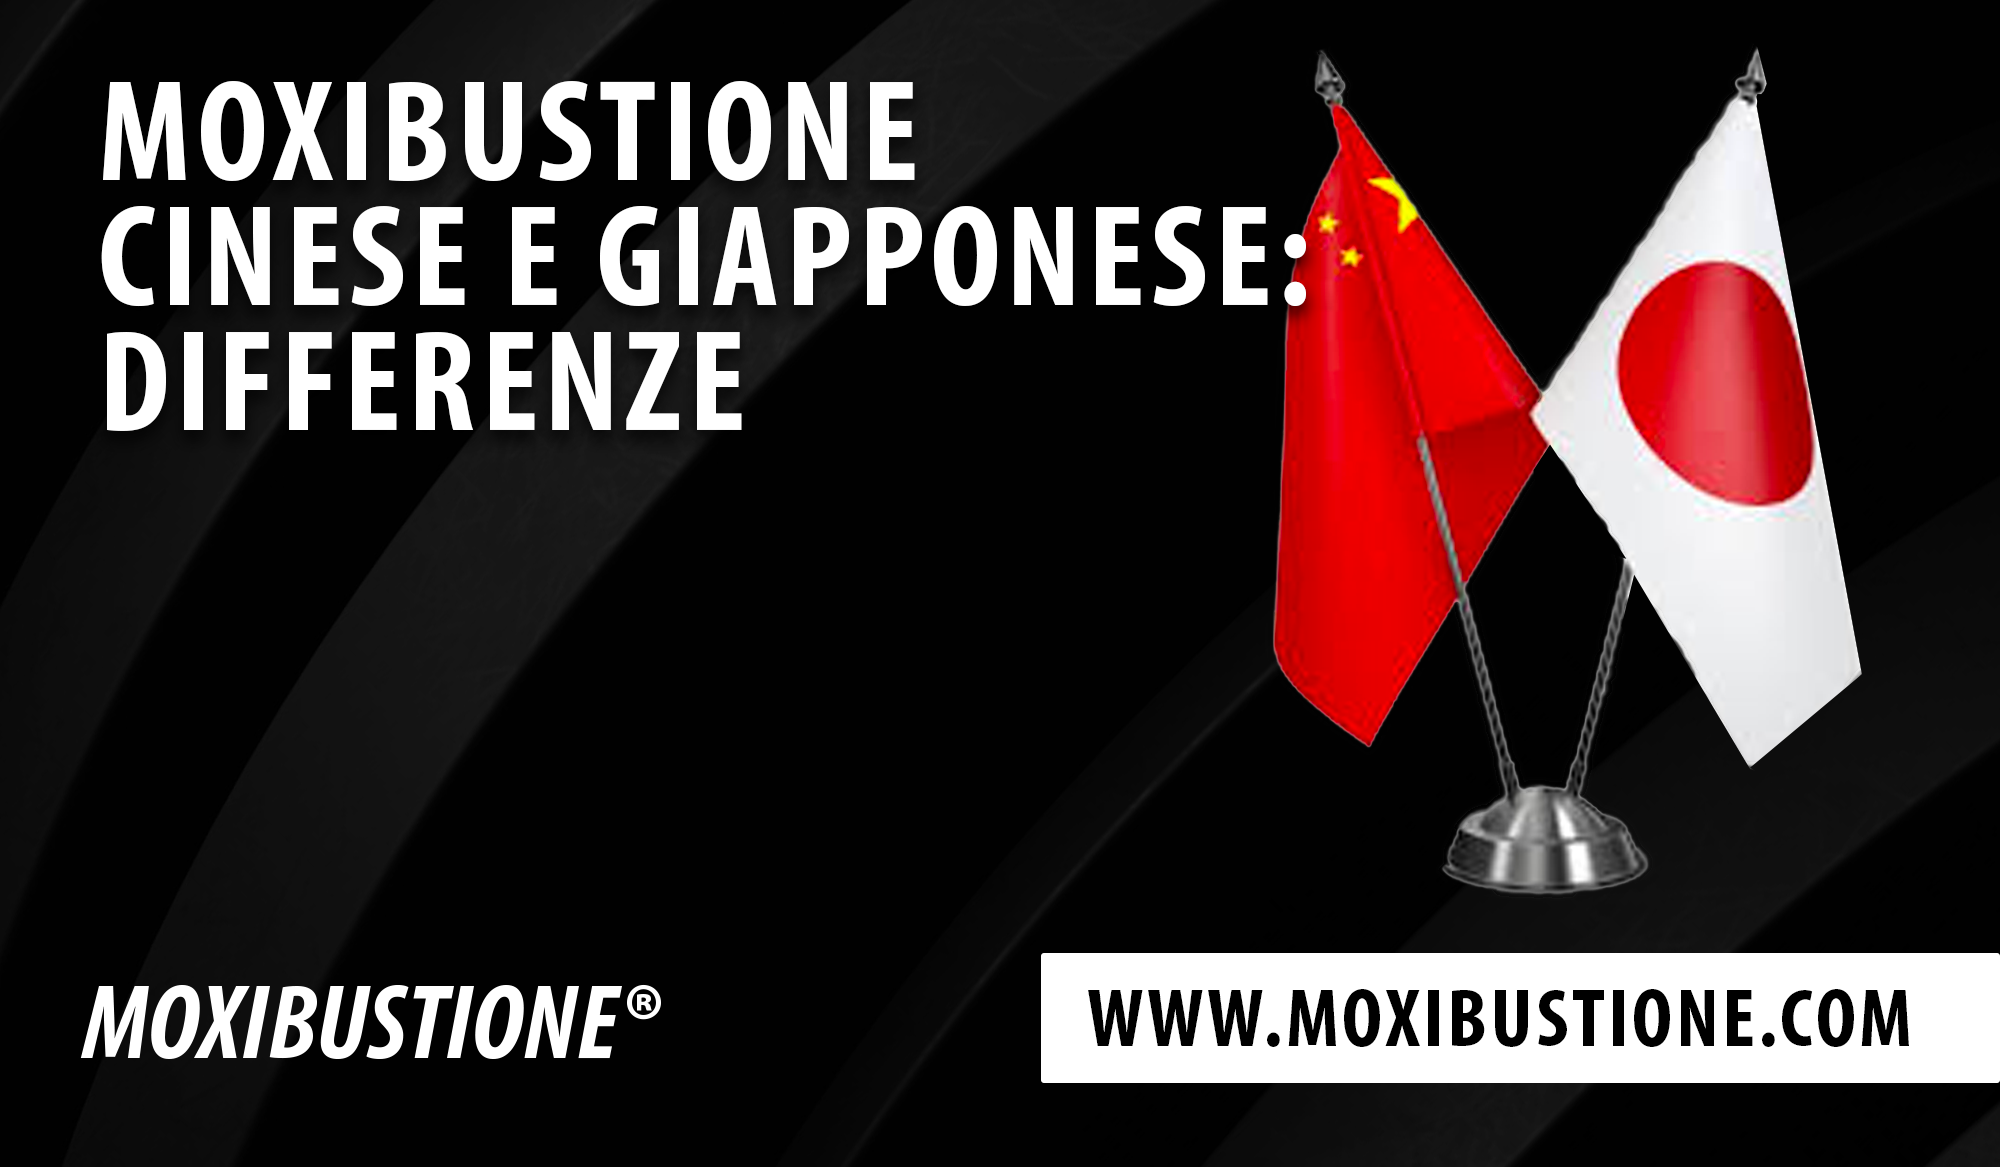 Moxibustione cinese e giapponese: differenze